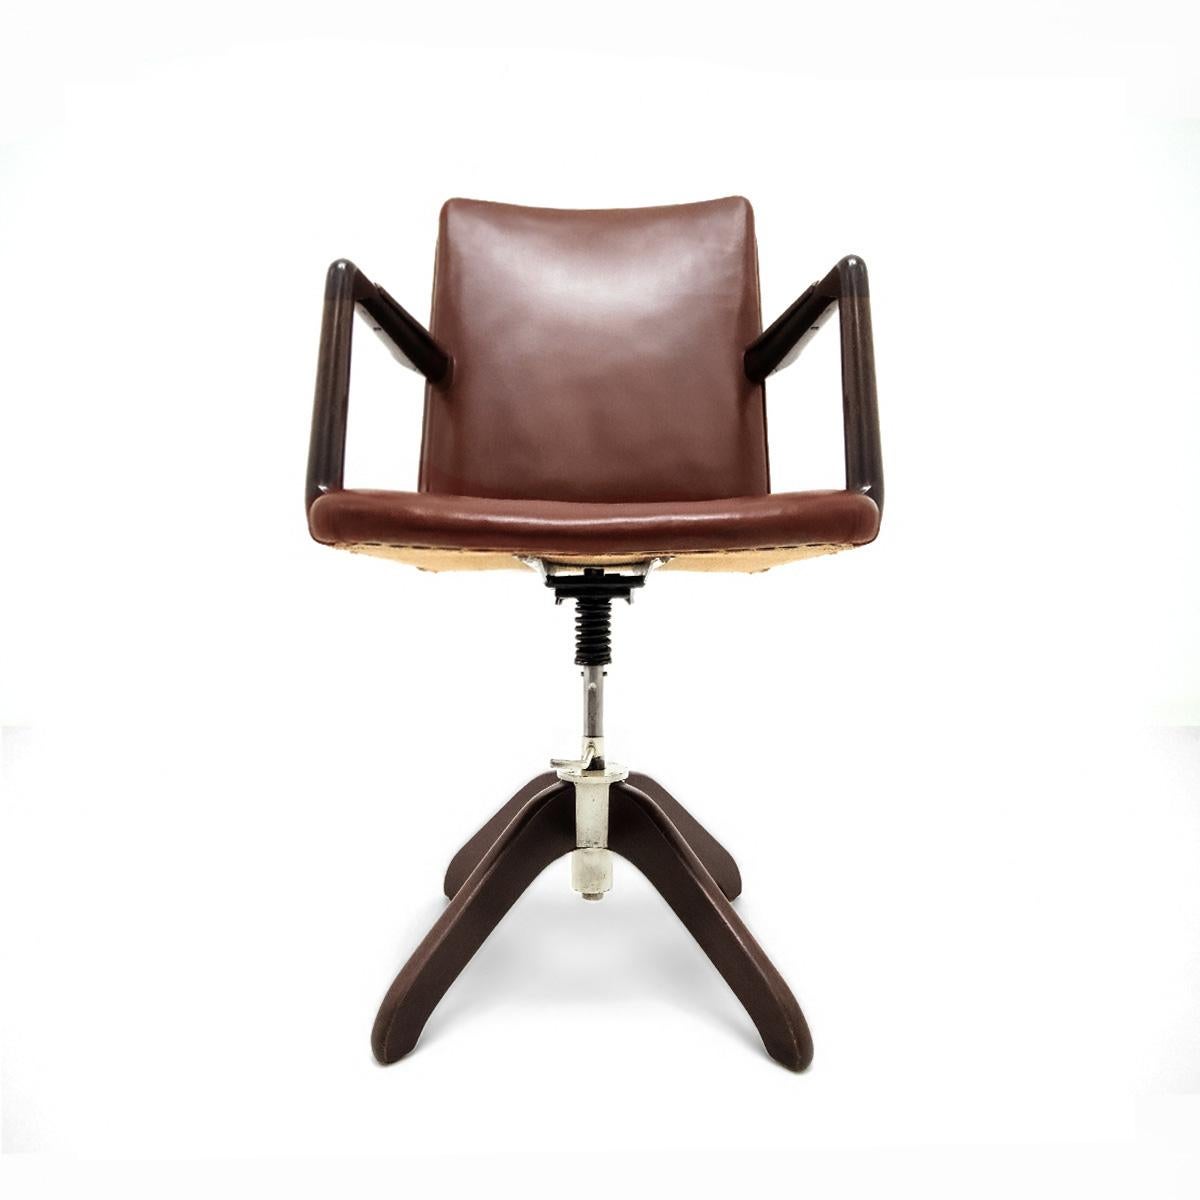 Hans J. Wegner Danish 1940s Leather and Oak Model A721 Executive Chair For Sale 5